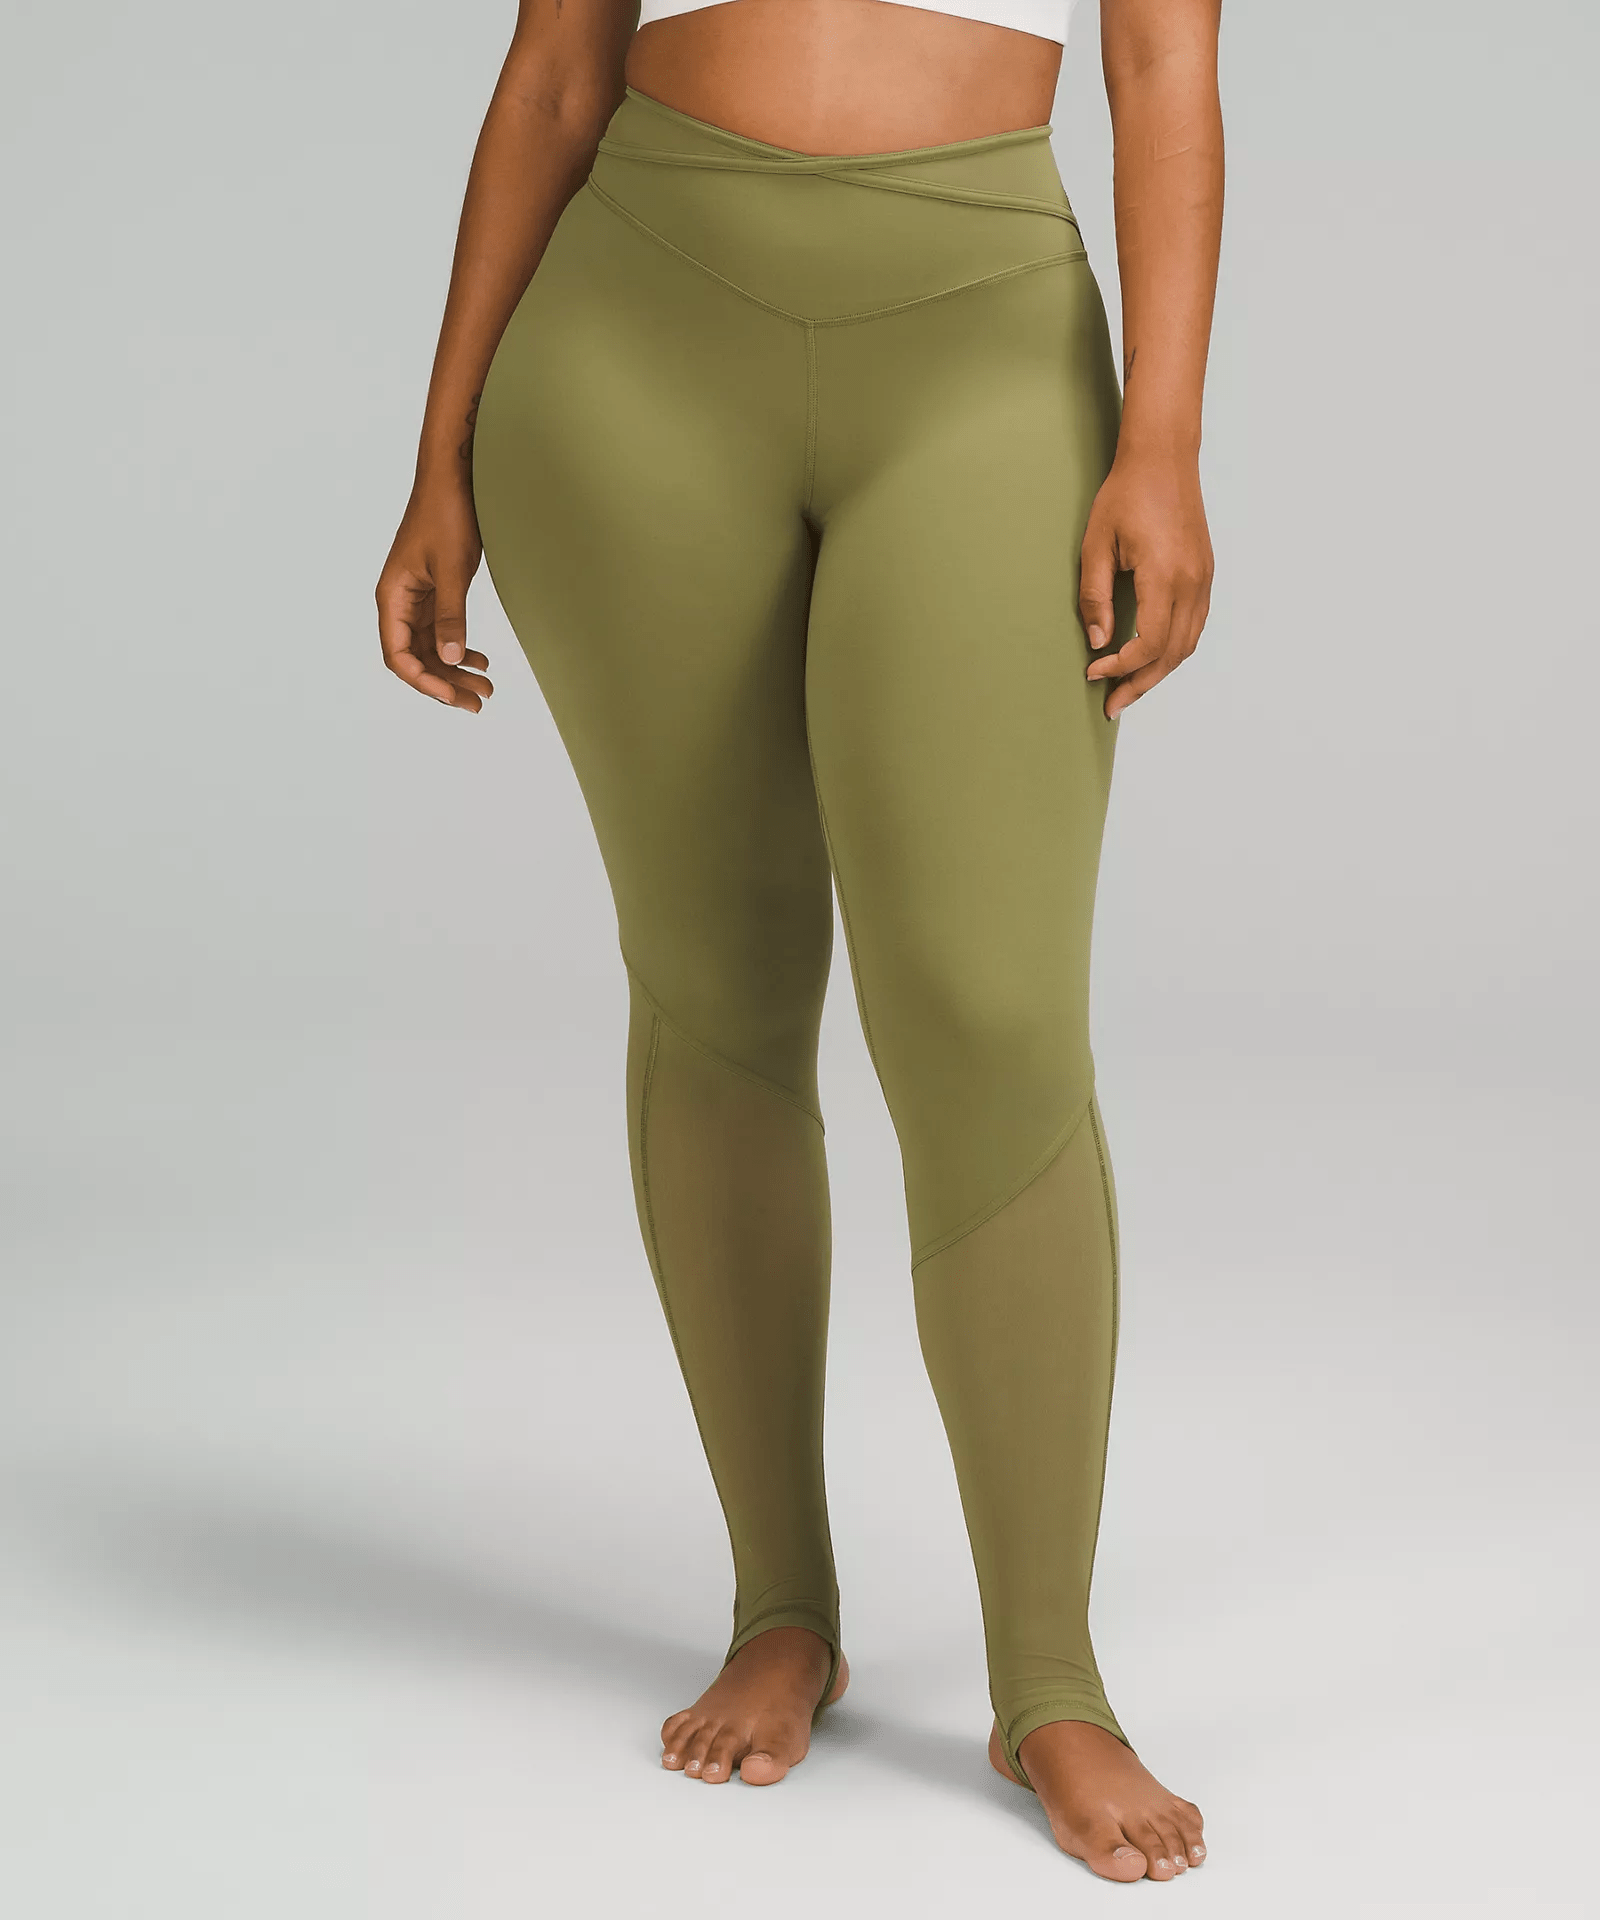 Compression High Waisted - 90 DEGREE BY REFLEX